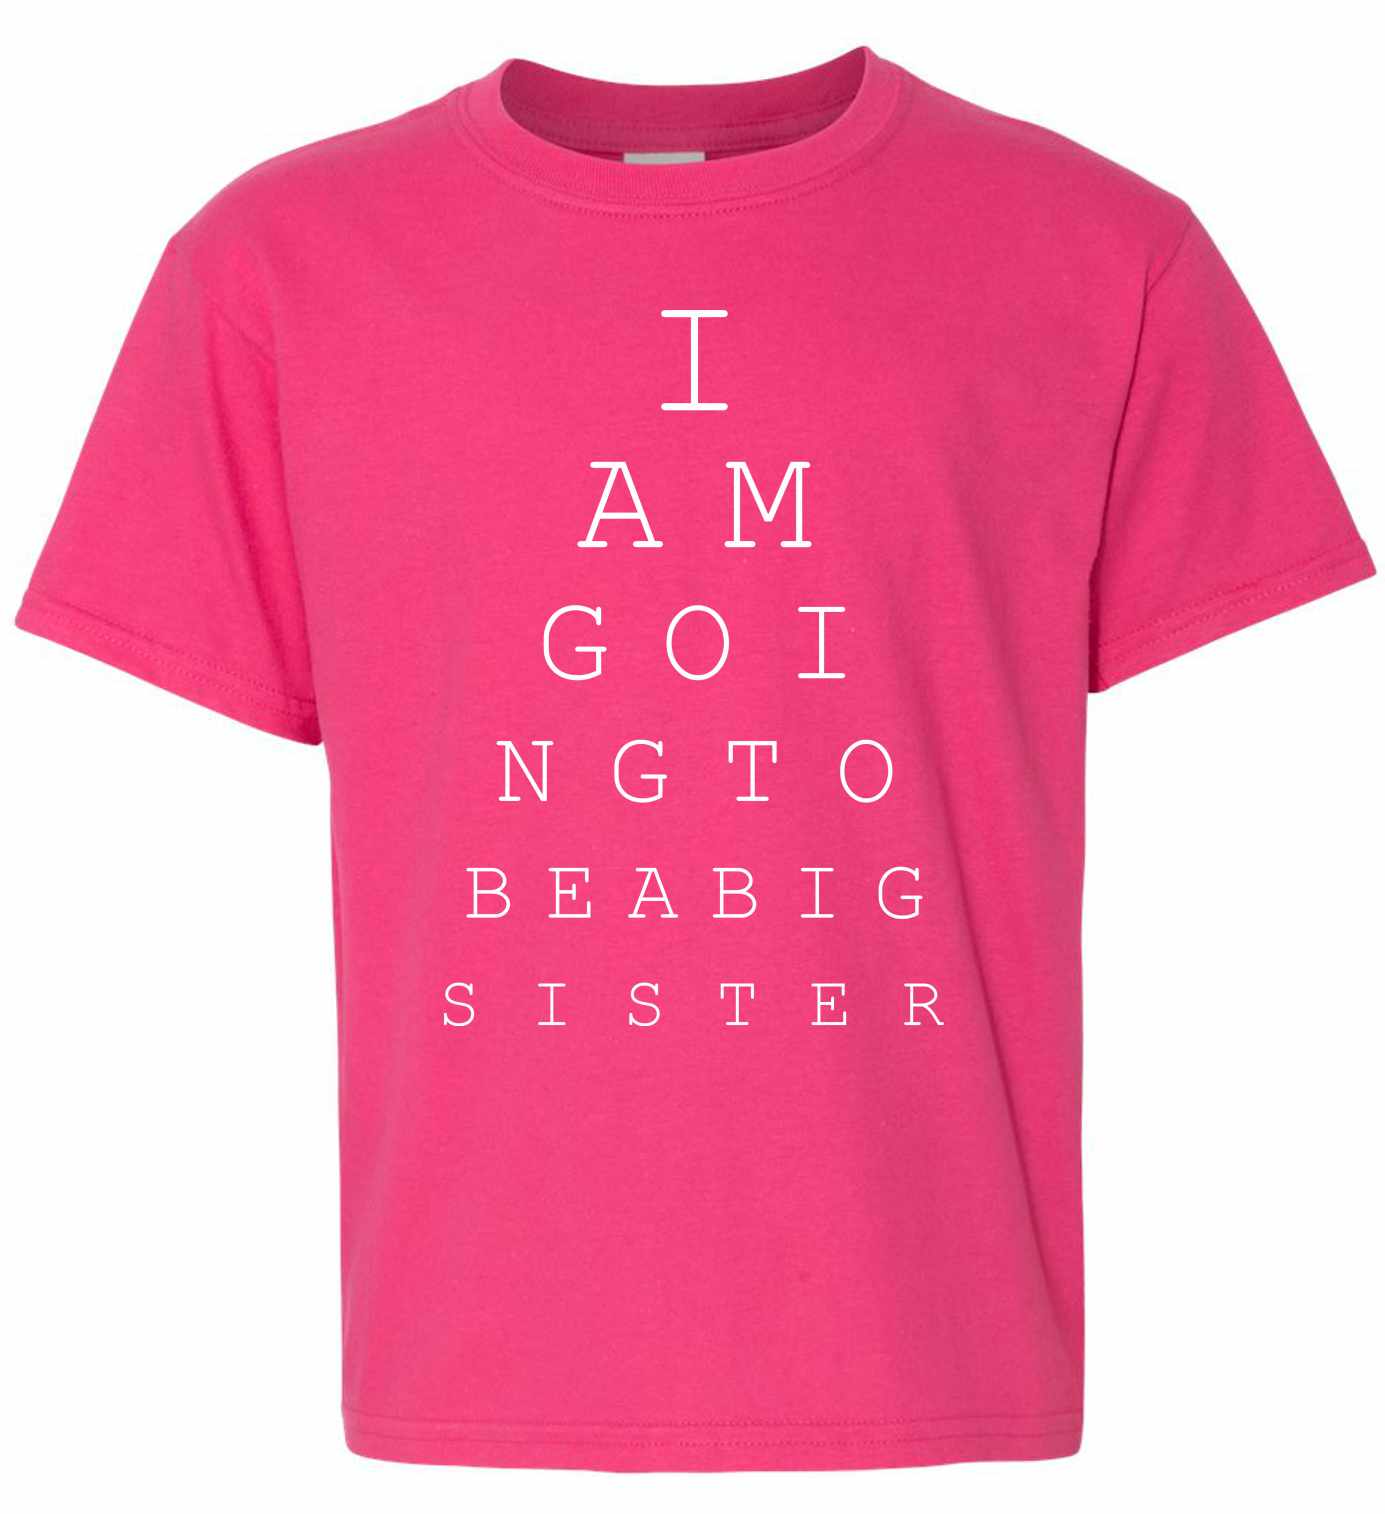 I AM GOING TO BE A BIG SISTER EYE CHART on Kids T-Shirt